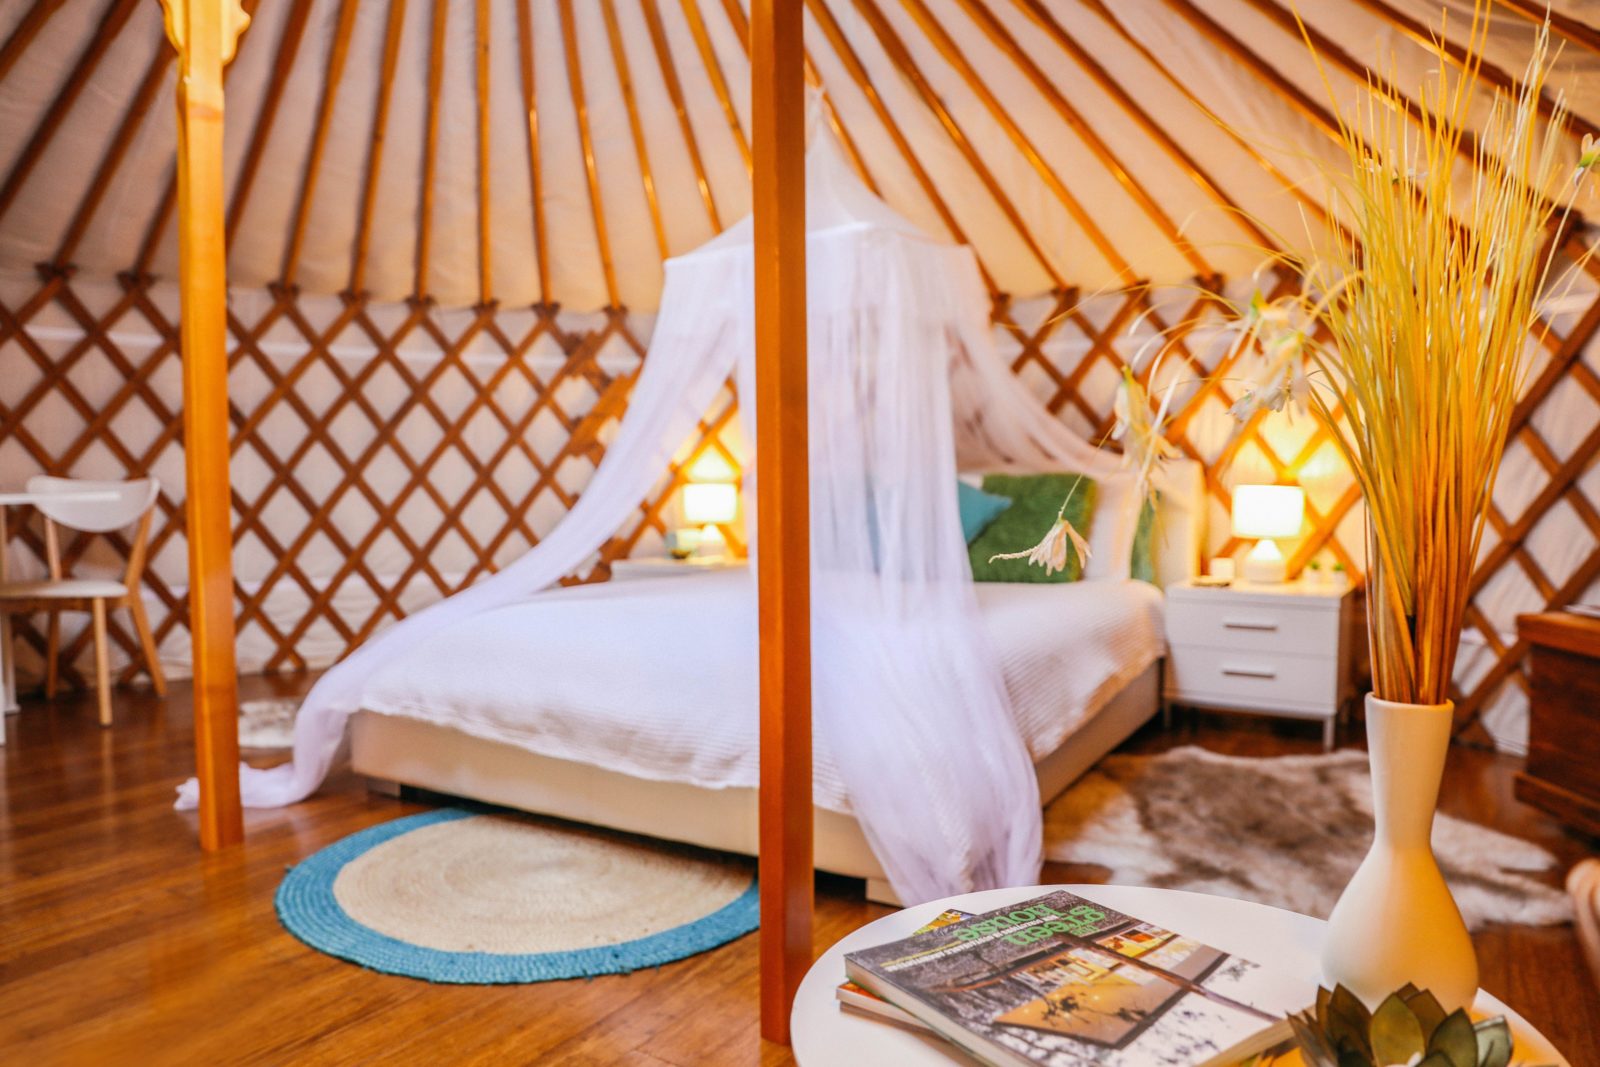 Inside the Yurt with bed